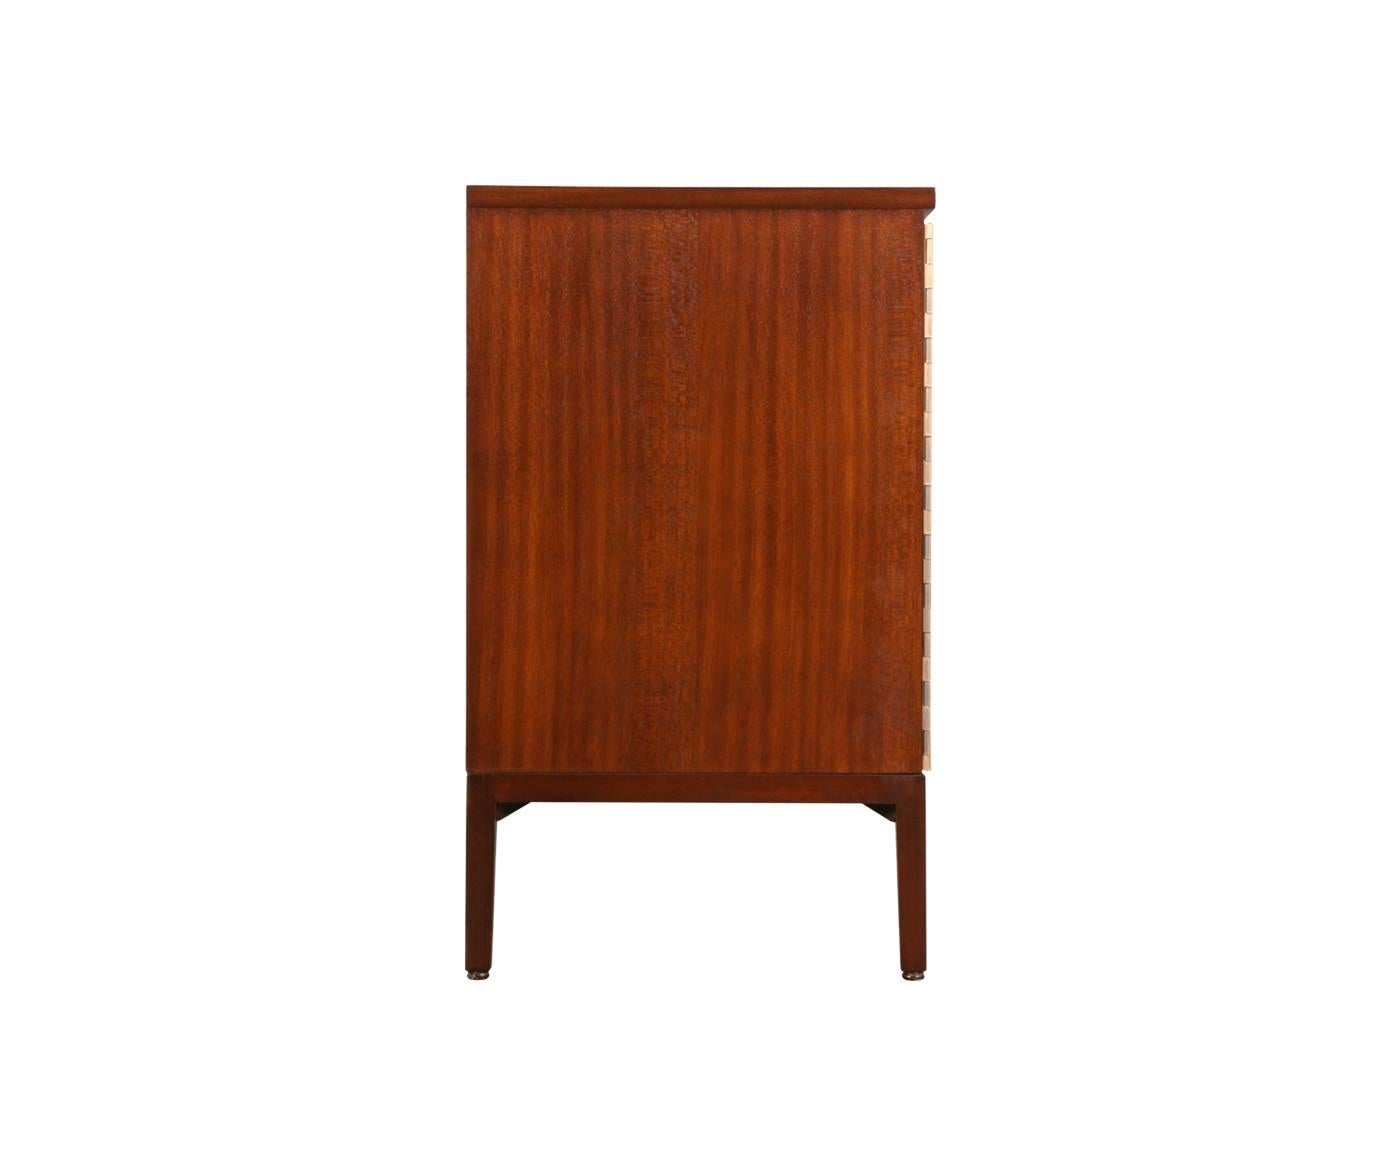 Mid-20th Century Paul McCobb “Irwin Collection” Credenza with Bi-Folding Doors for Calvin Group